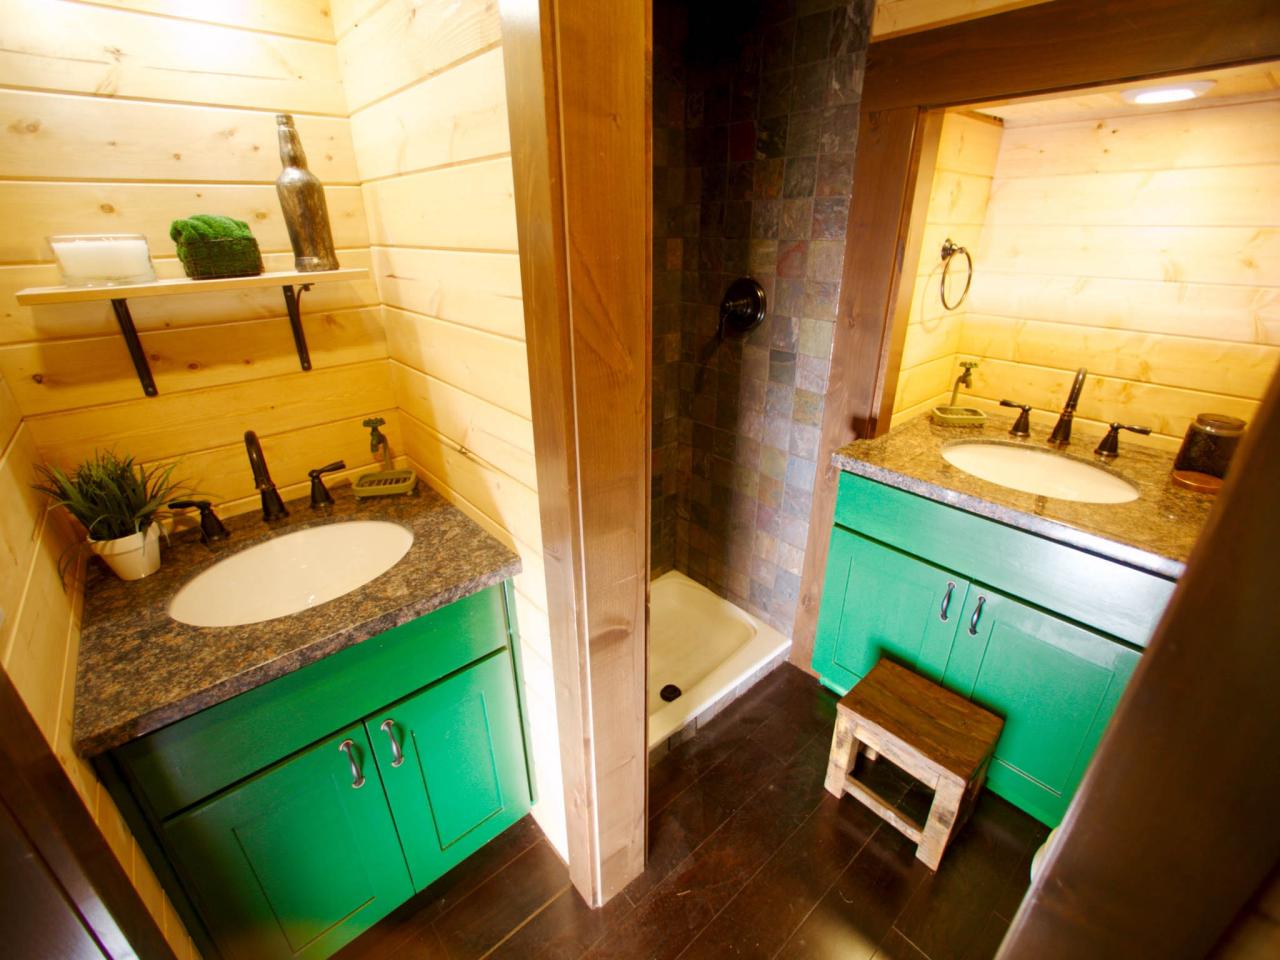 18 Tiny House Bathrooms Packed With Style   HGTV's Decorating ...